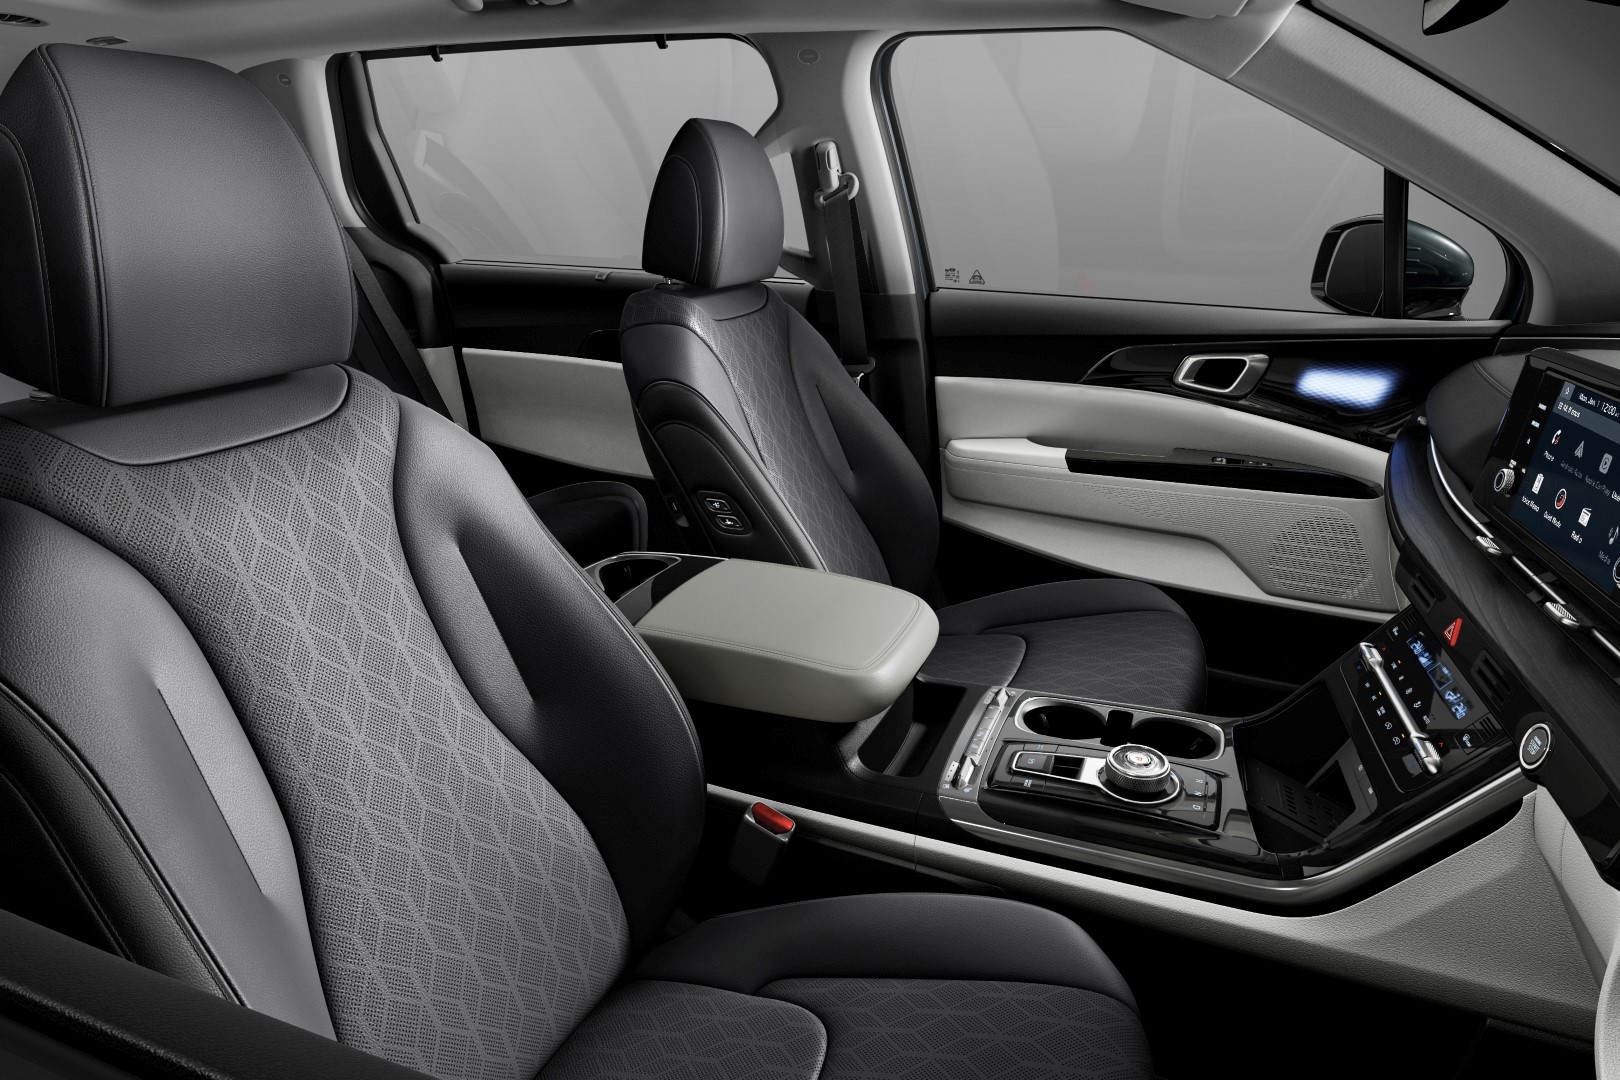 Kia Carnival 11-seater CKD is here for RM213,888